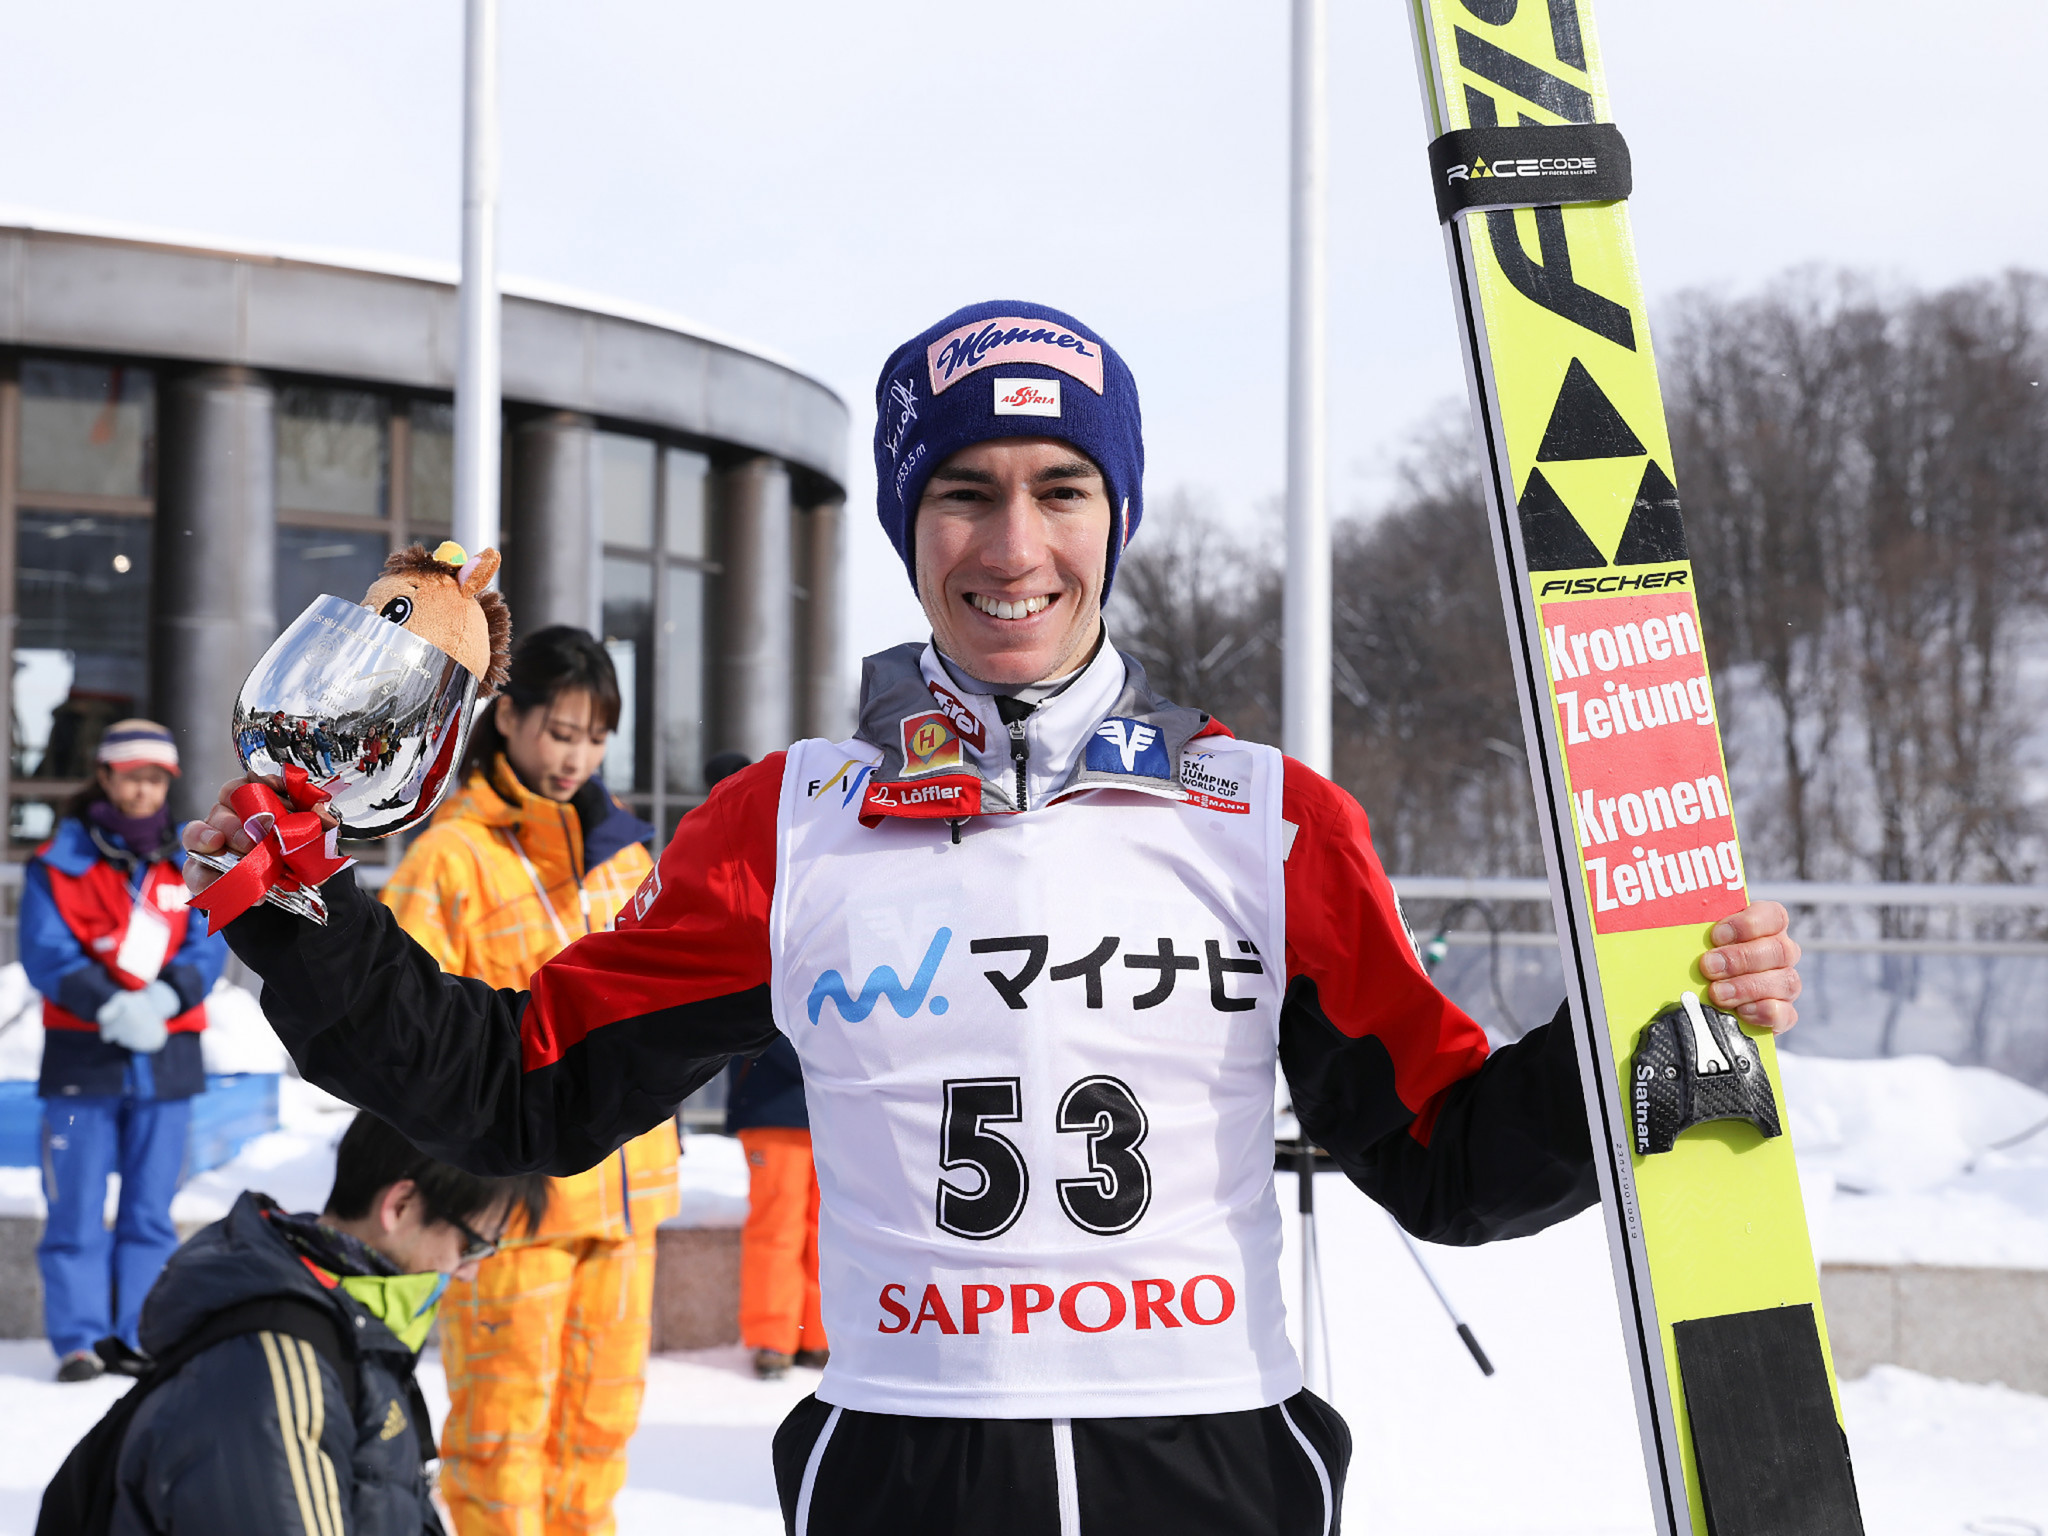 Stefan Kraft won for the third time in a row today on the FIS Ski Jumping World Cup circuit ©Getty Images